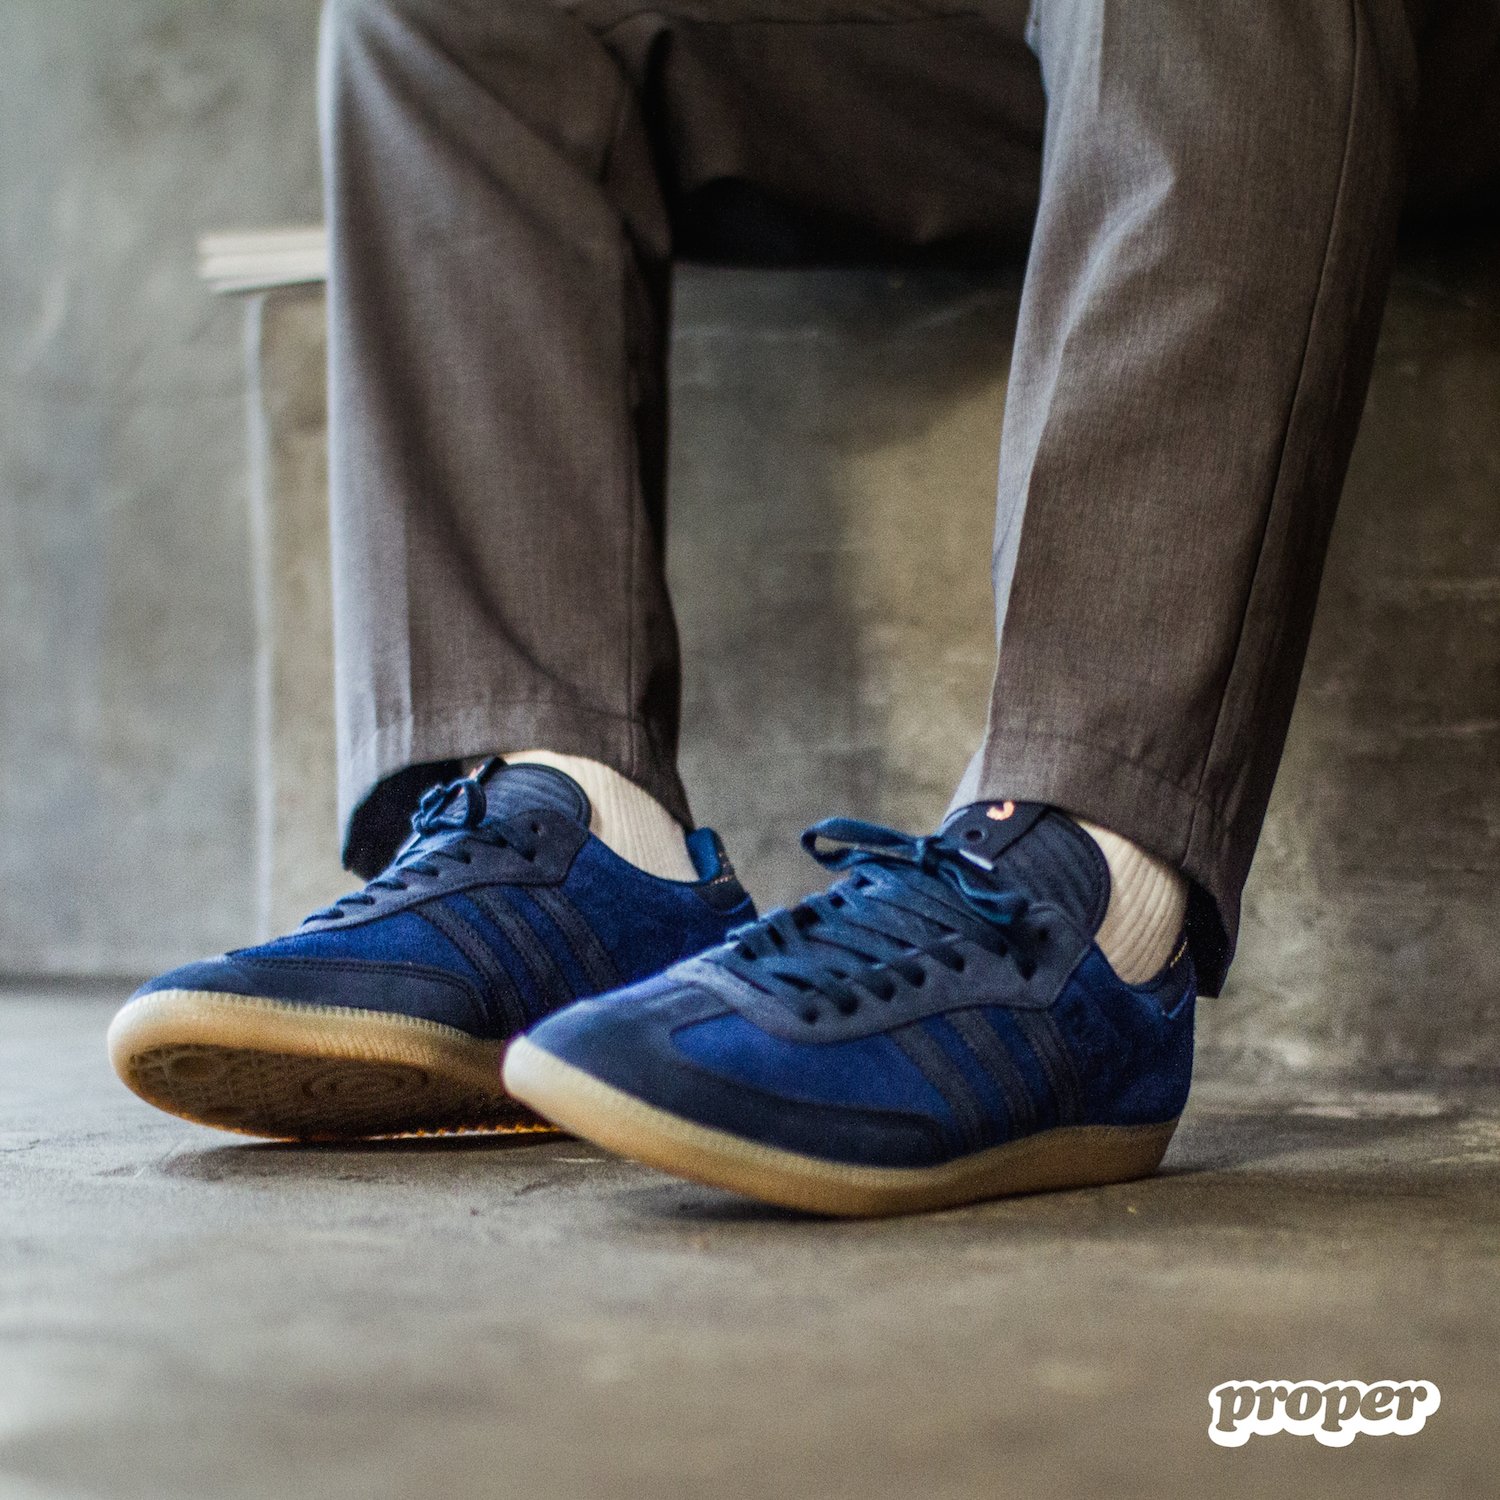 Kers etiket Luidruchtig properlbc on Twitter: "Adidas Consortium x Starcow Samba available now  in-store &amp; online (https://t.co/dfg9M1ZNAL) in Navy ($120).  https://t.co/wqVv9V1ywj" / Twitter